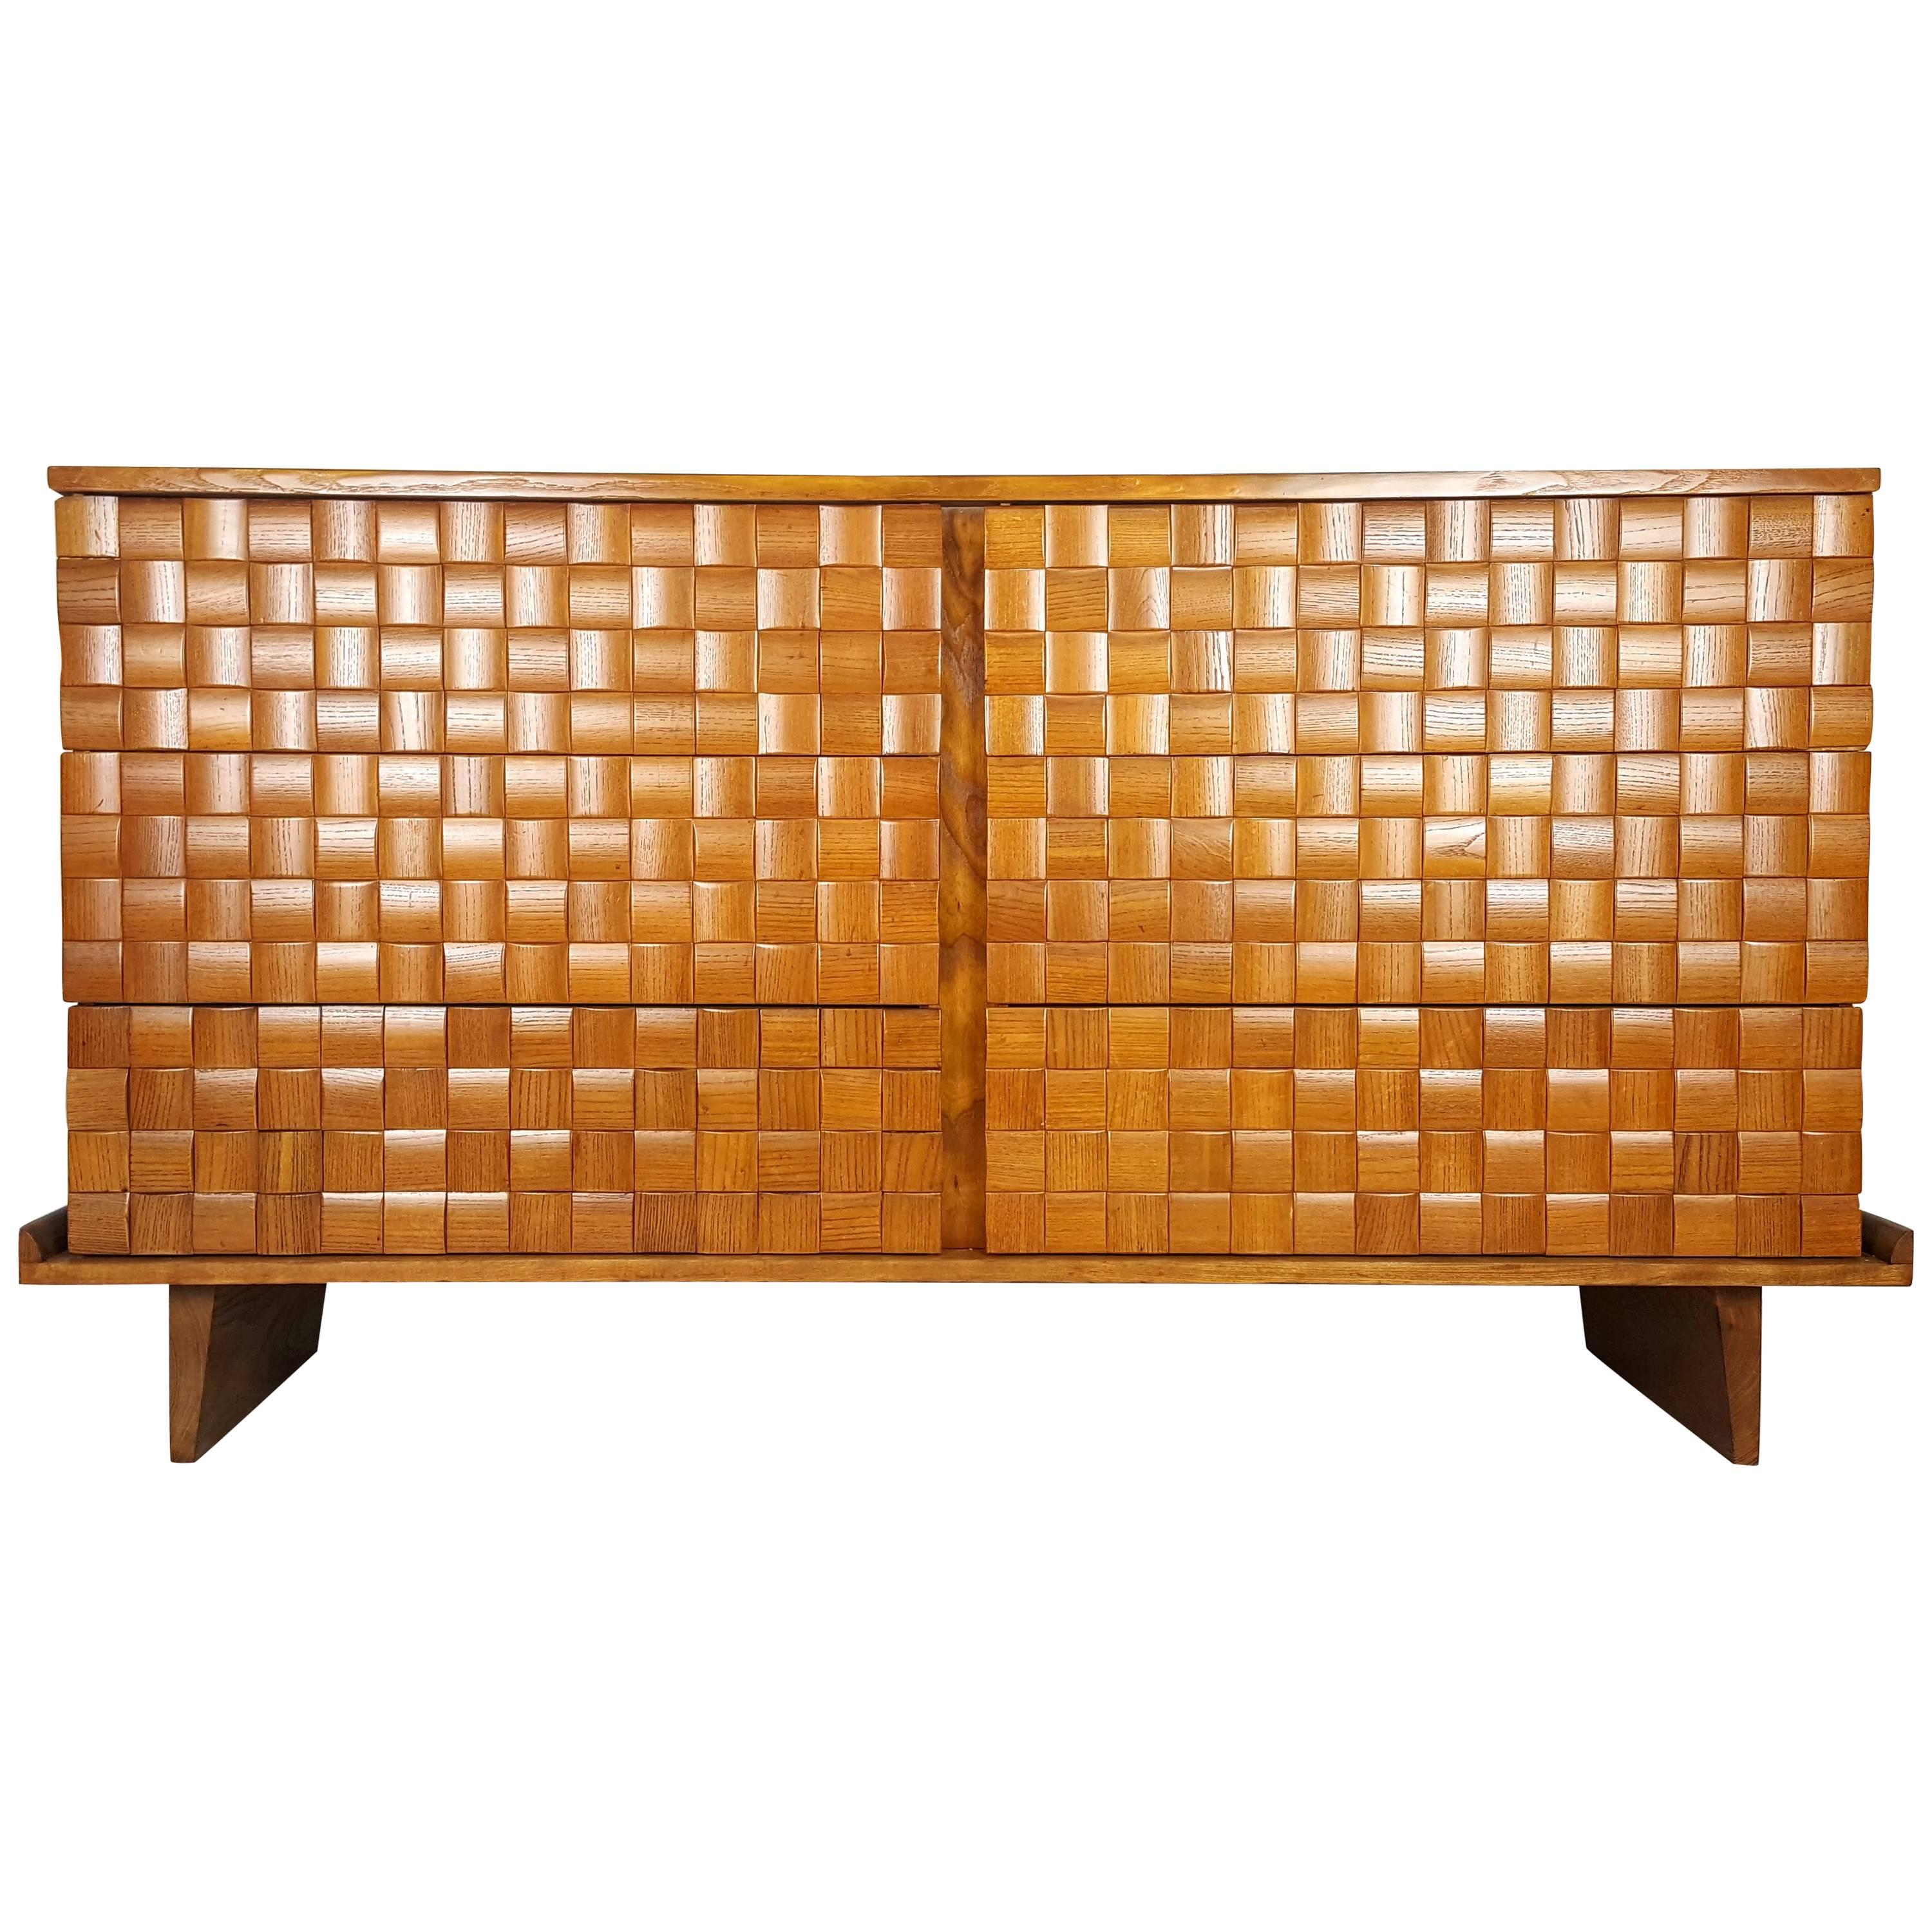 Exquisite and Rare Six-Drawer Chest or Dresser by Paul Laszlo, 1950s